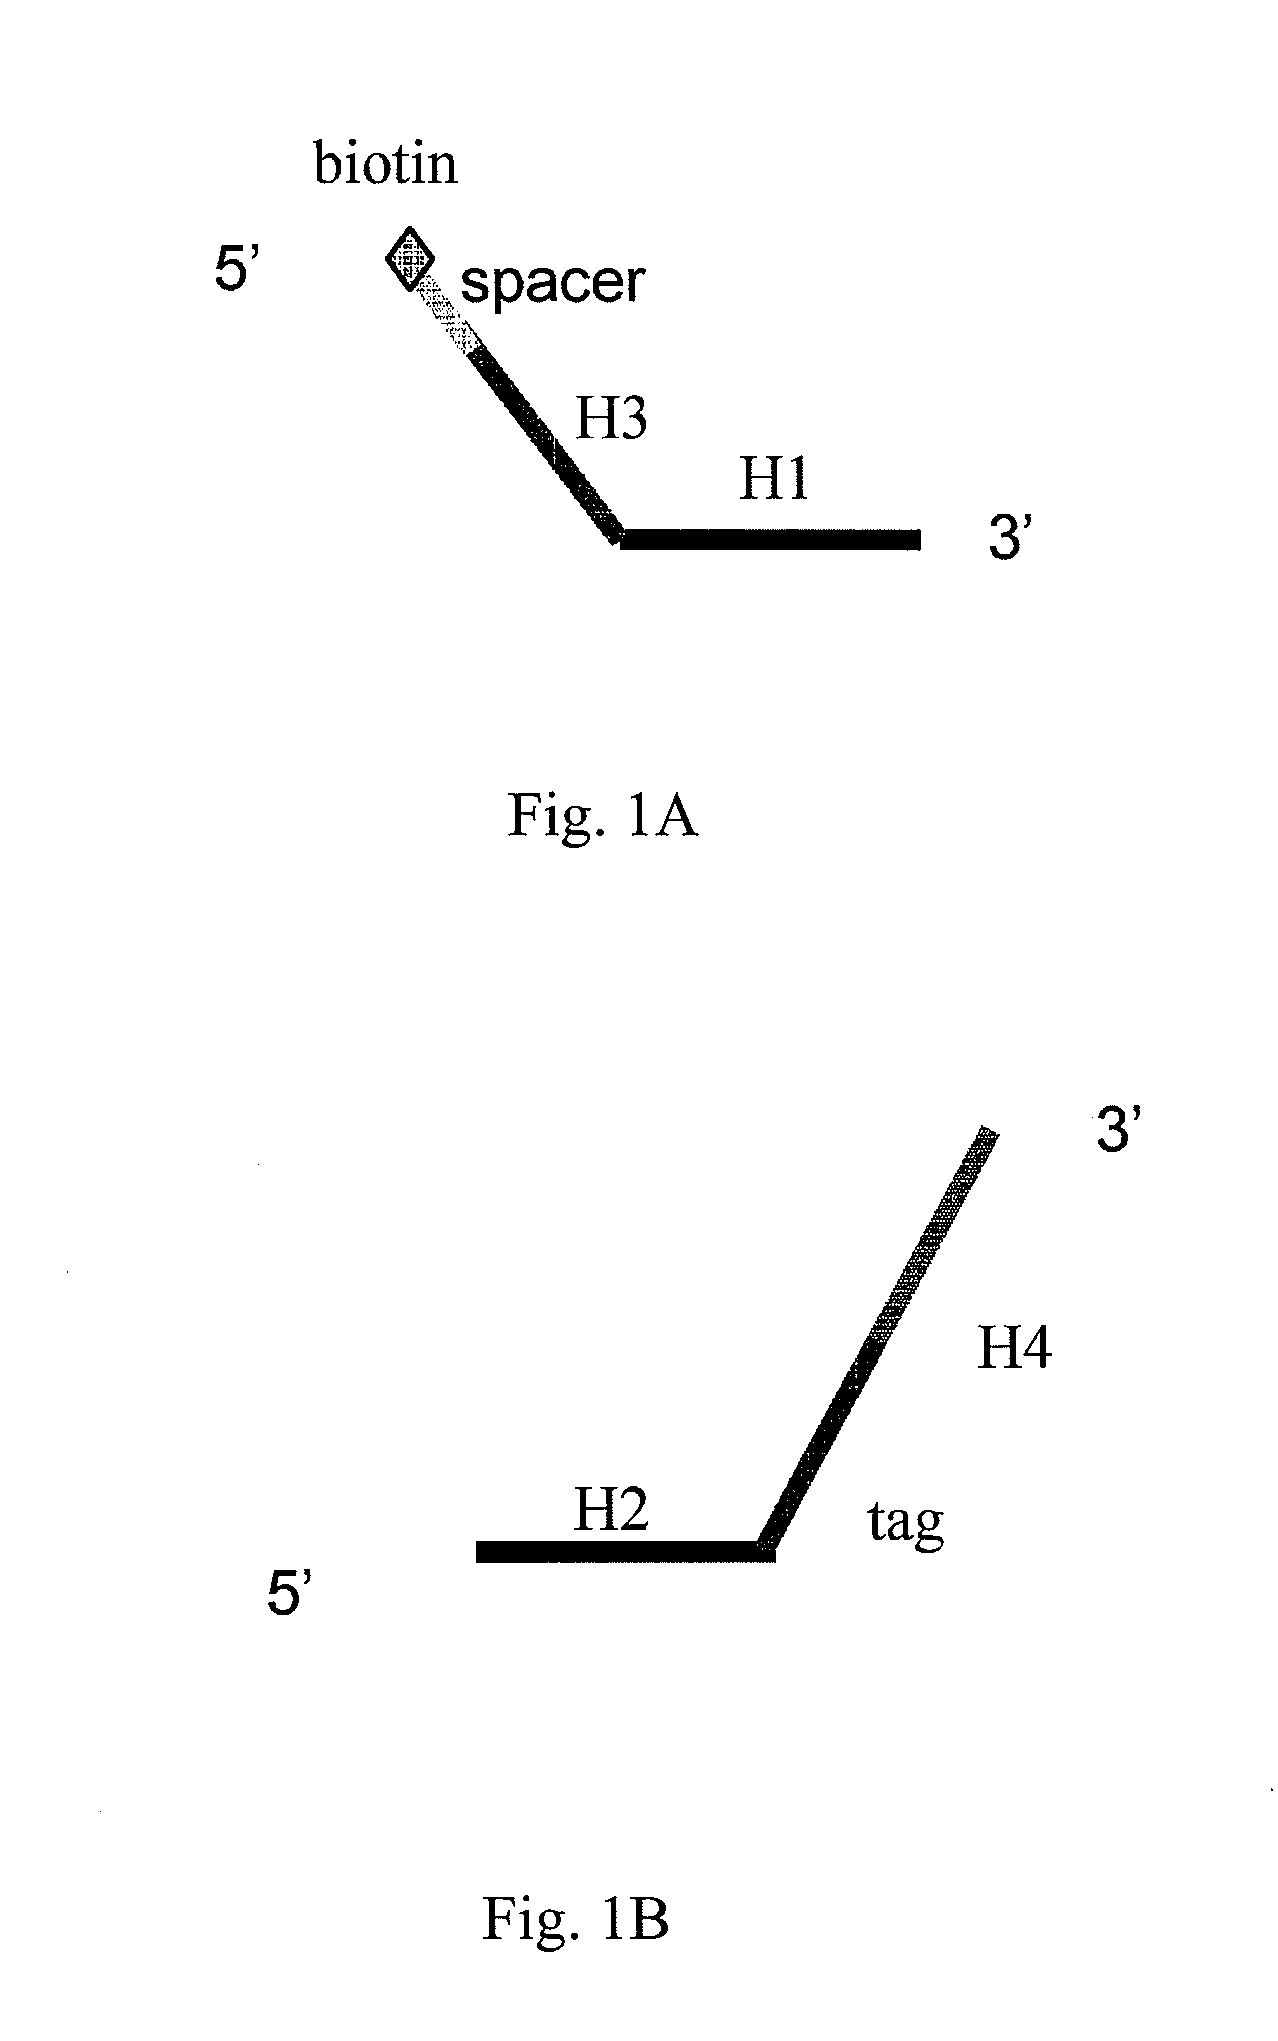 Test probes, common oligonucleotide chips, nucleic acid detection method, and their uses